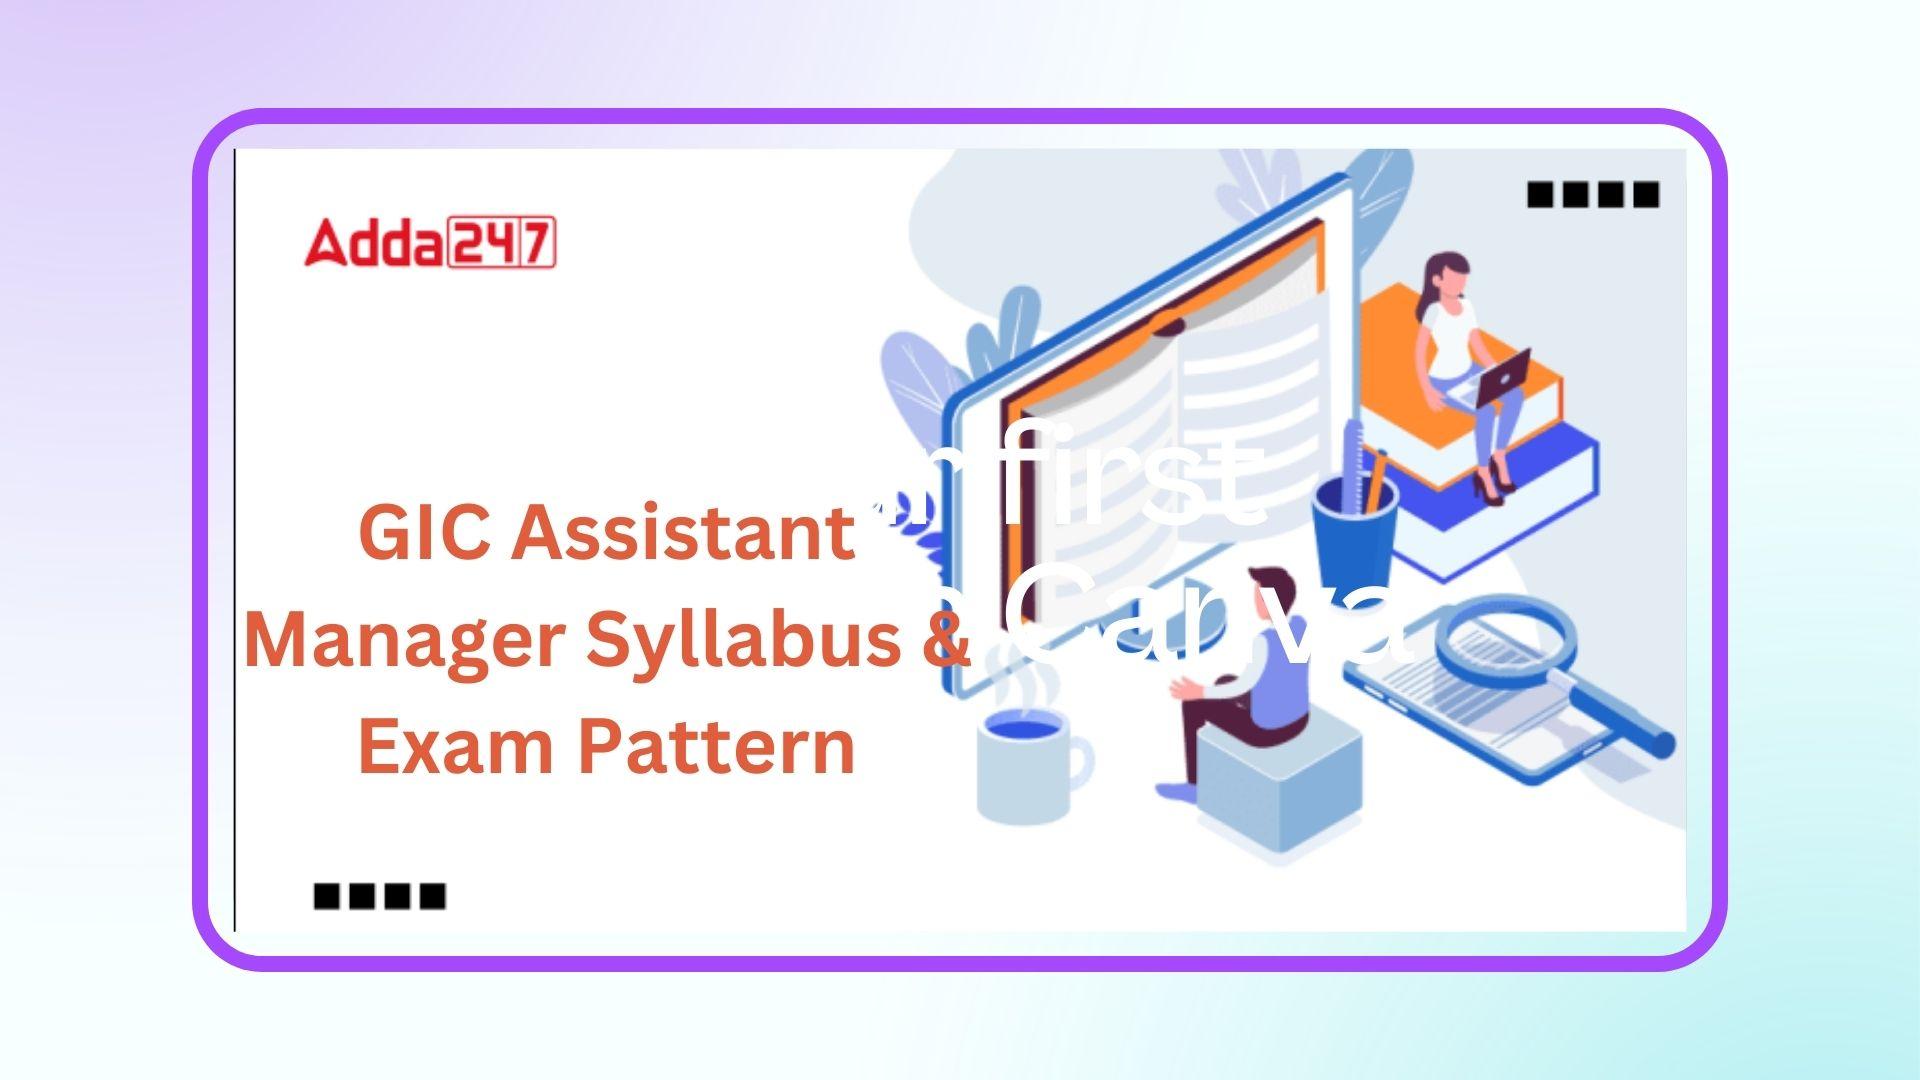 GIC Assistant Manager Syllabus & Exam Pattern